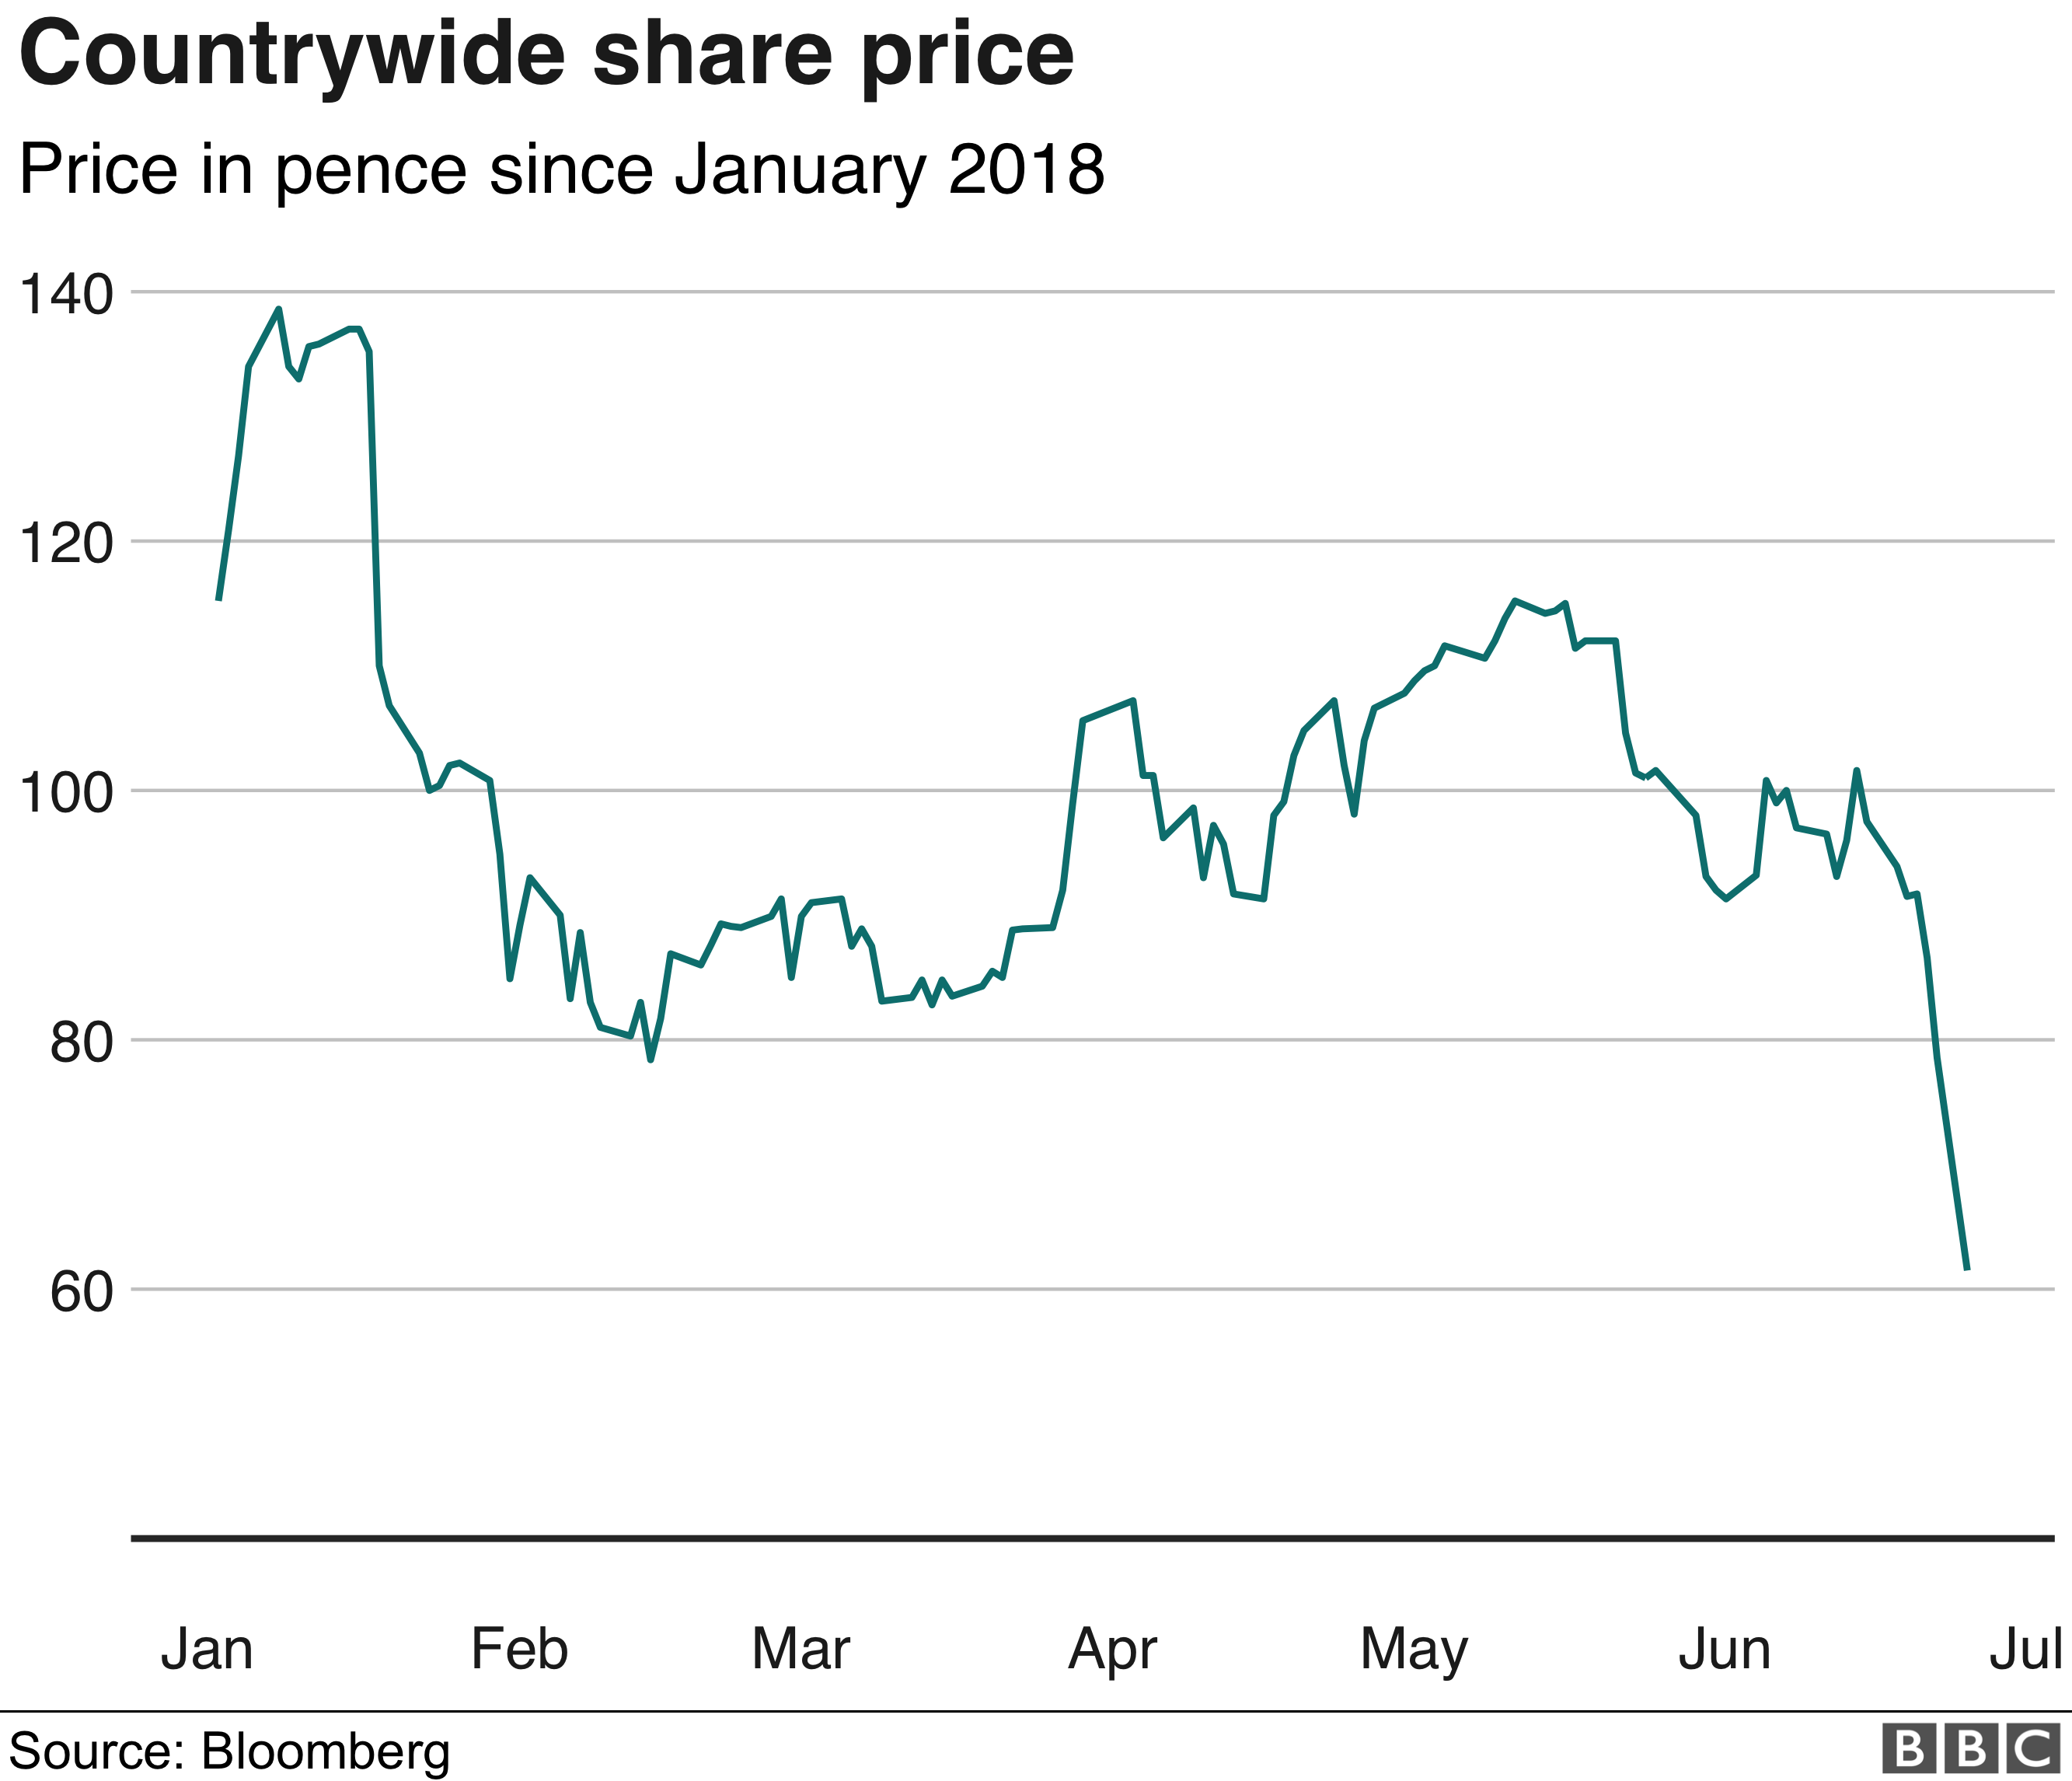 Countrywide share price